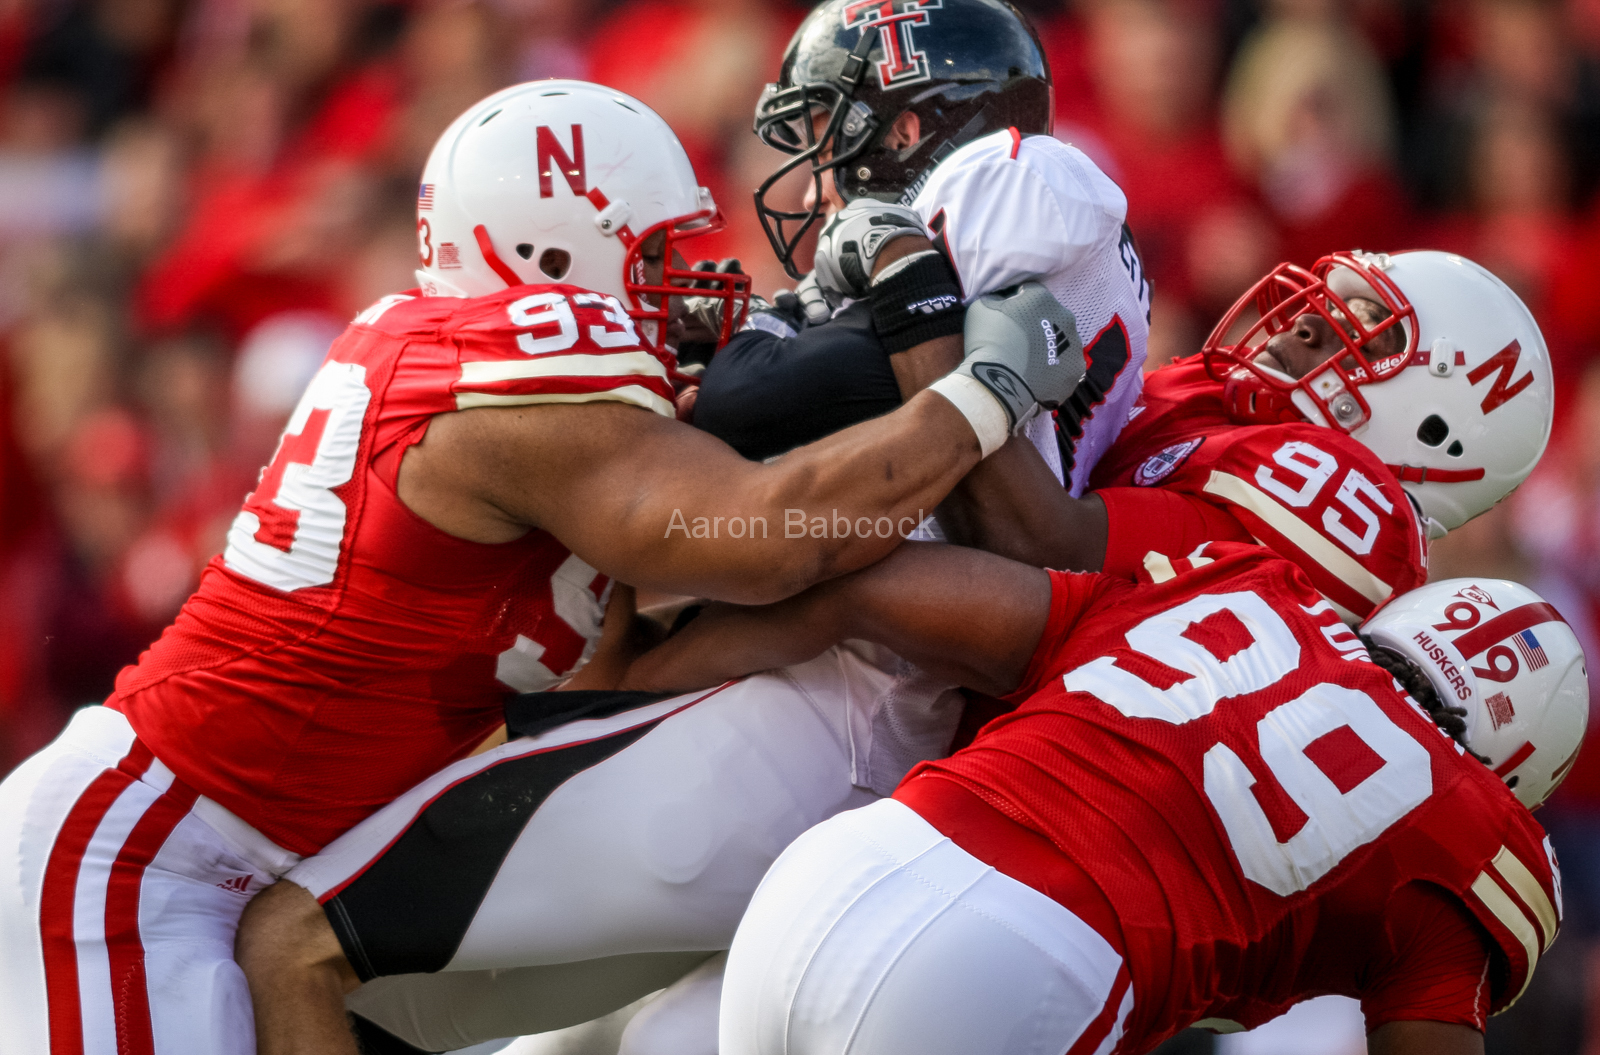 Ndamukong Suh (93), Pierre Allen (95) and Barry Turner (99) team up n a tackle against Texas Tech on Oct. 17, 2009. © Aaron Babcock